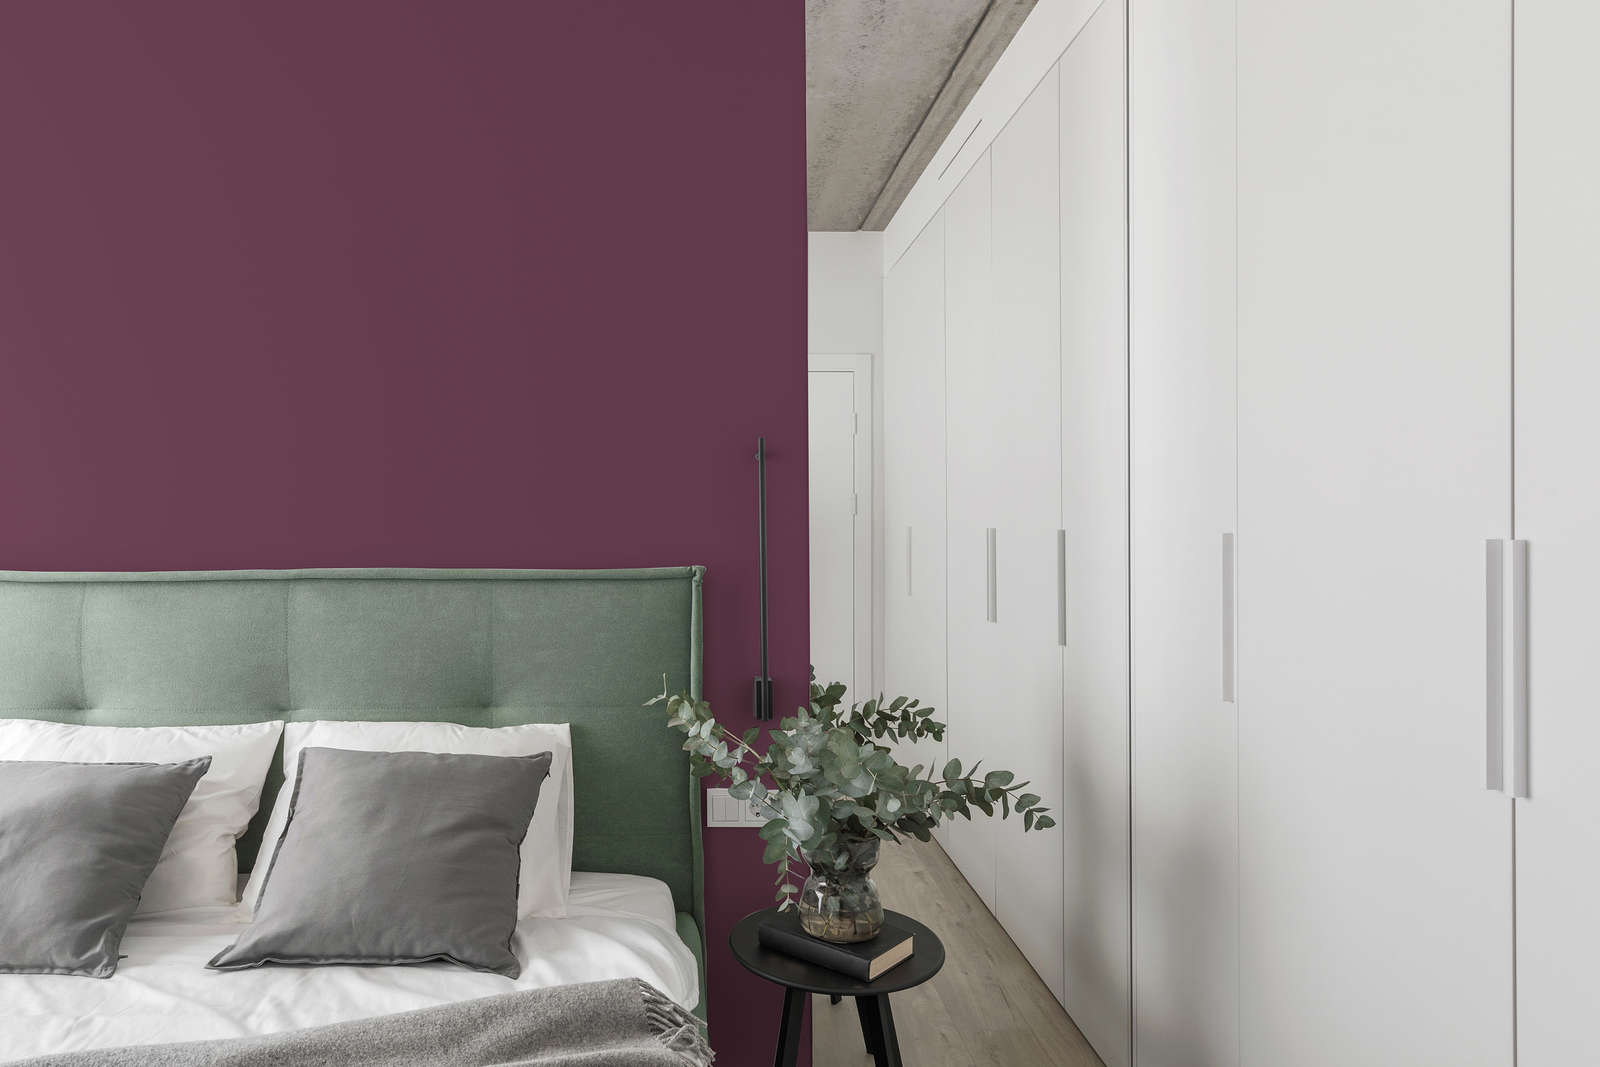             Premium Wall Paint strong berry »Beautiful Berry« NW212 – 5 litre
        